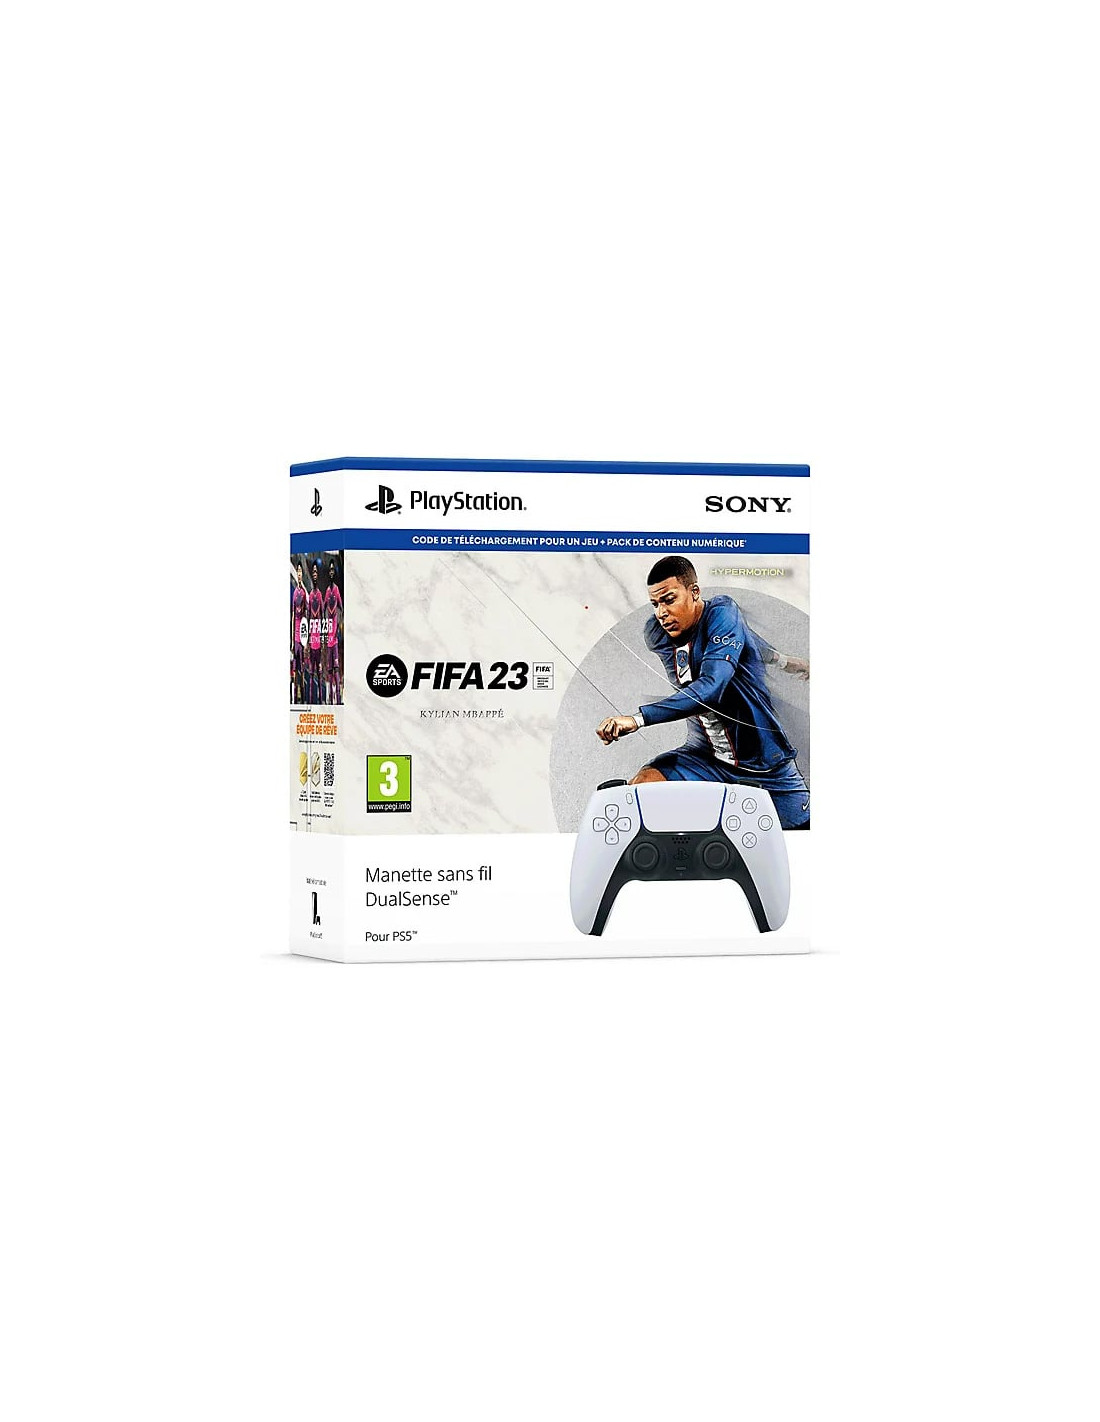 SONY MANETTE PS5 BLANCHE + FIFA23 (Téléchargeable) - Scoop gaming